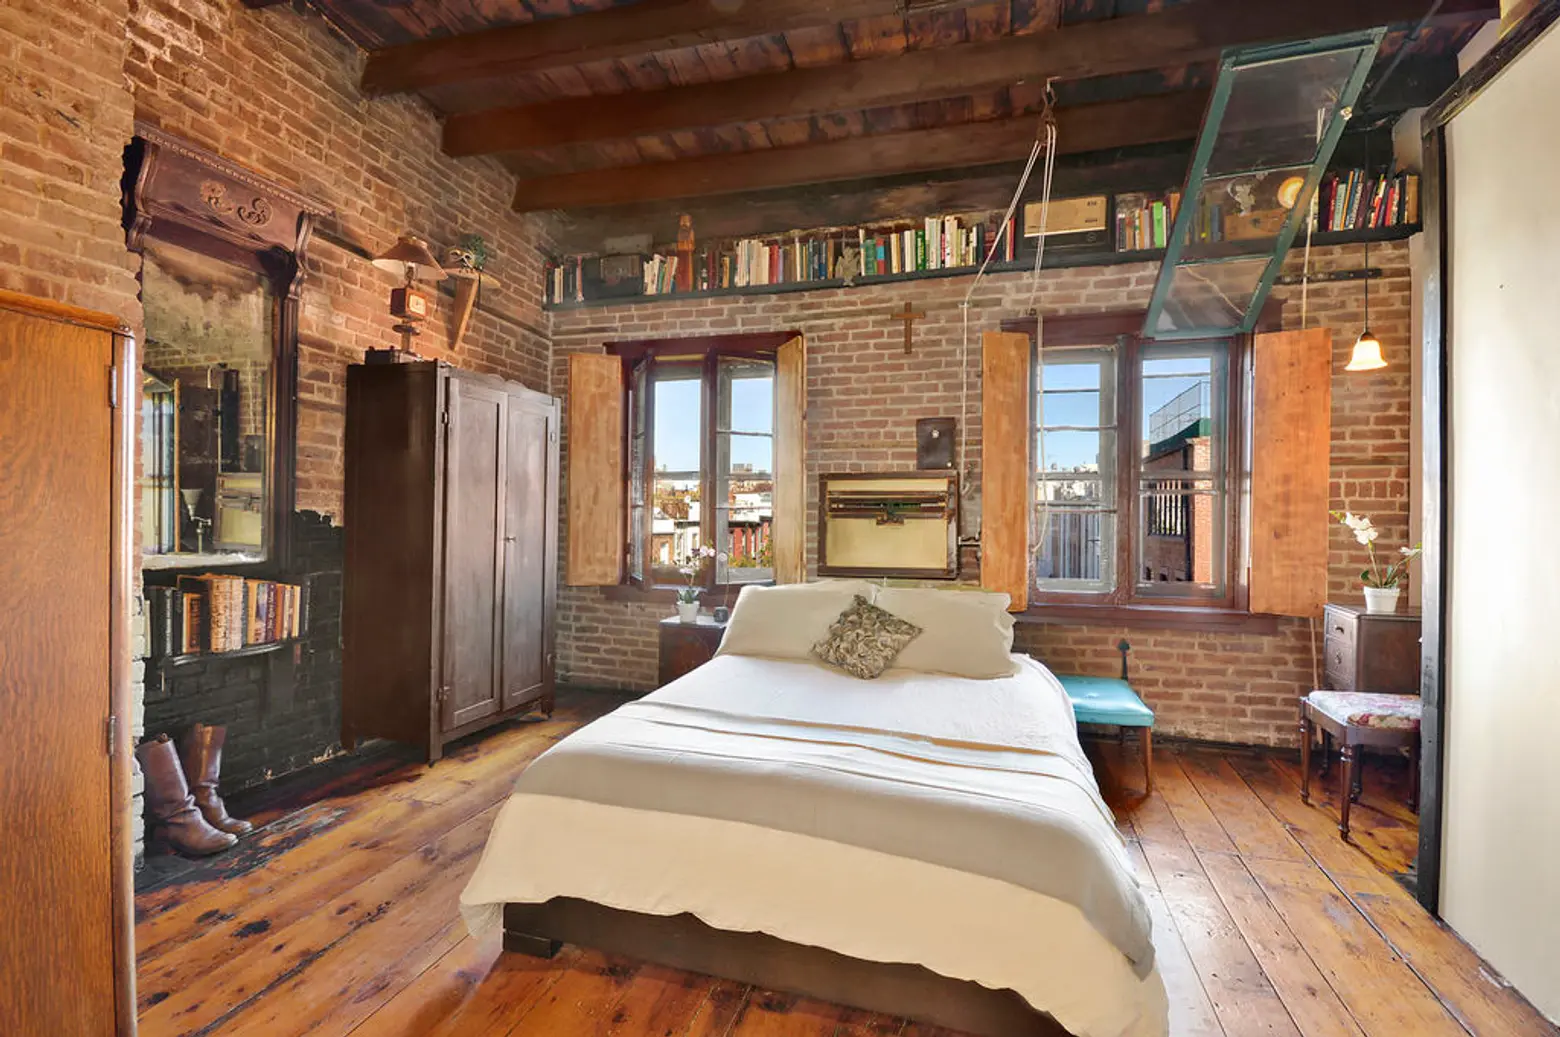 This Brooklyn Heights Pad Brings a Touch of the Countryside to the City